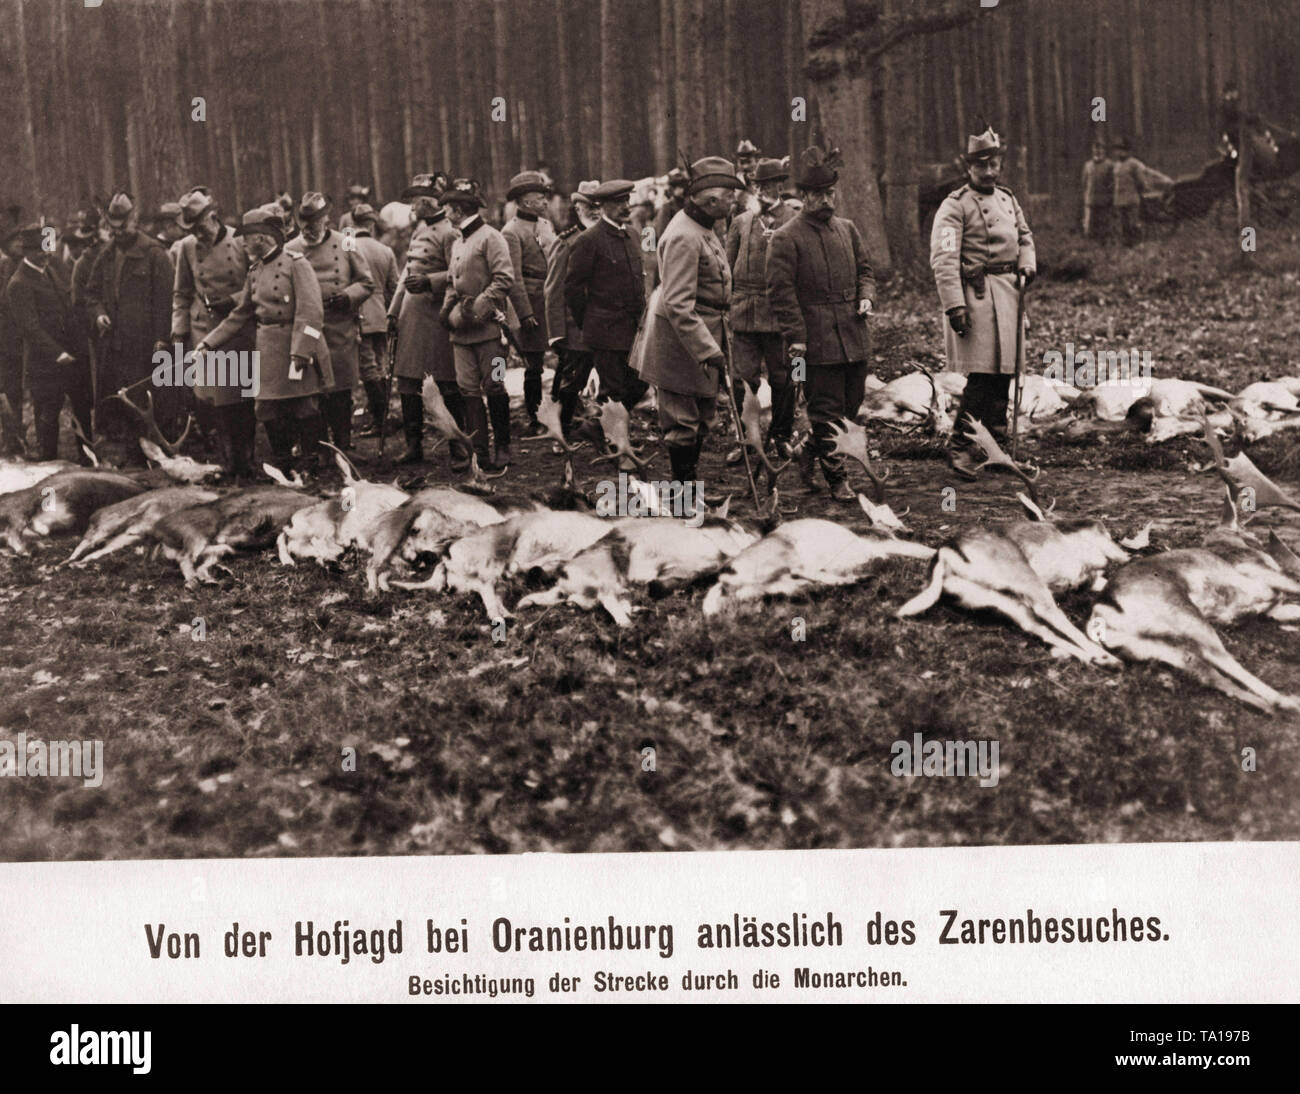 Emperor Wilhelm II (right in the hunting uniform), with his hunting guest, the Russian Tsar Nicholas II (left next to him), the killed fallow deers (27) after a court hunting (fladry) in Oranienburg, Brandenburg, Prussia. On the left with walking stick, Oberstjaegermeister ( Chief Master of Hunting) Heinrich von Heintze-Weissenrode, on the left beside Otto Fuerst zu Stolberg-Wernigerode. Stock Photo